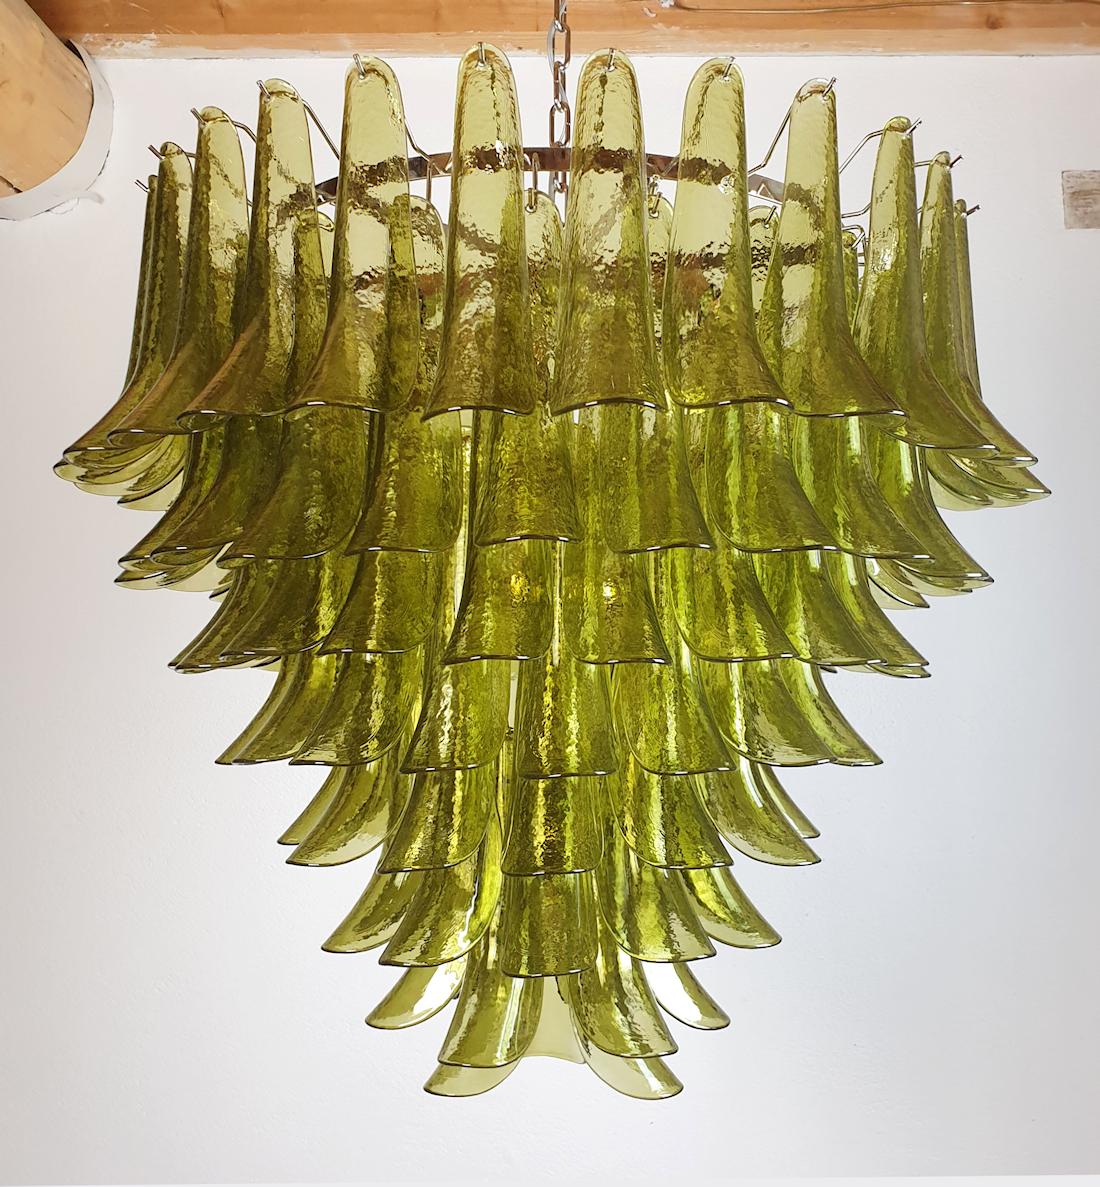 Vintage Green Murano glass very large chandelier, by Mazzega Italy late 1970s.
The Mid-Century Modern Murano chandelier has seven tiers of delicate handmade petal glasses, and a nickel frame.
The chandelier has 12 lights, rewired for the US.
It